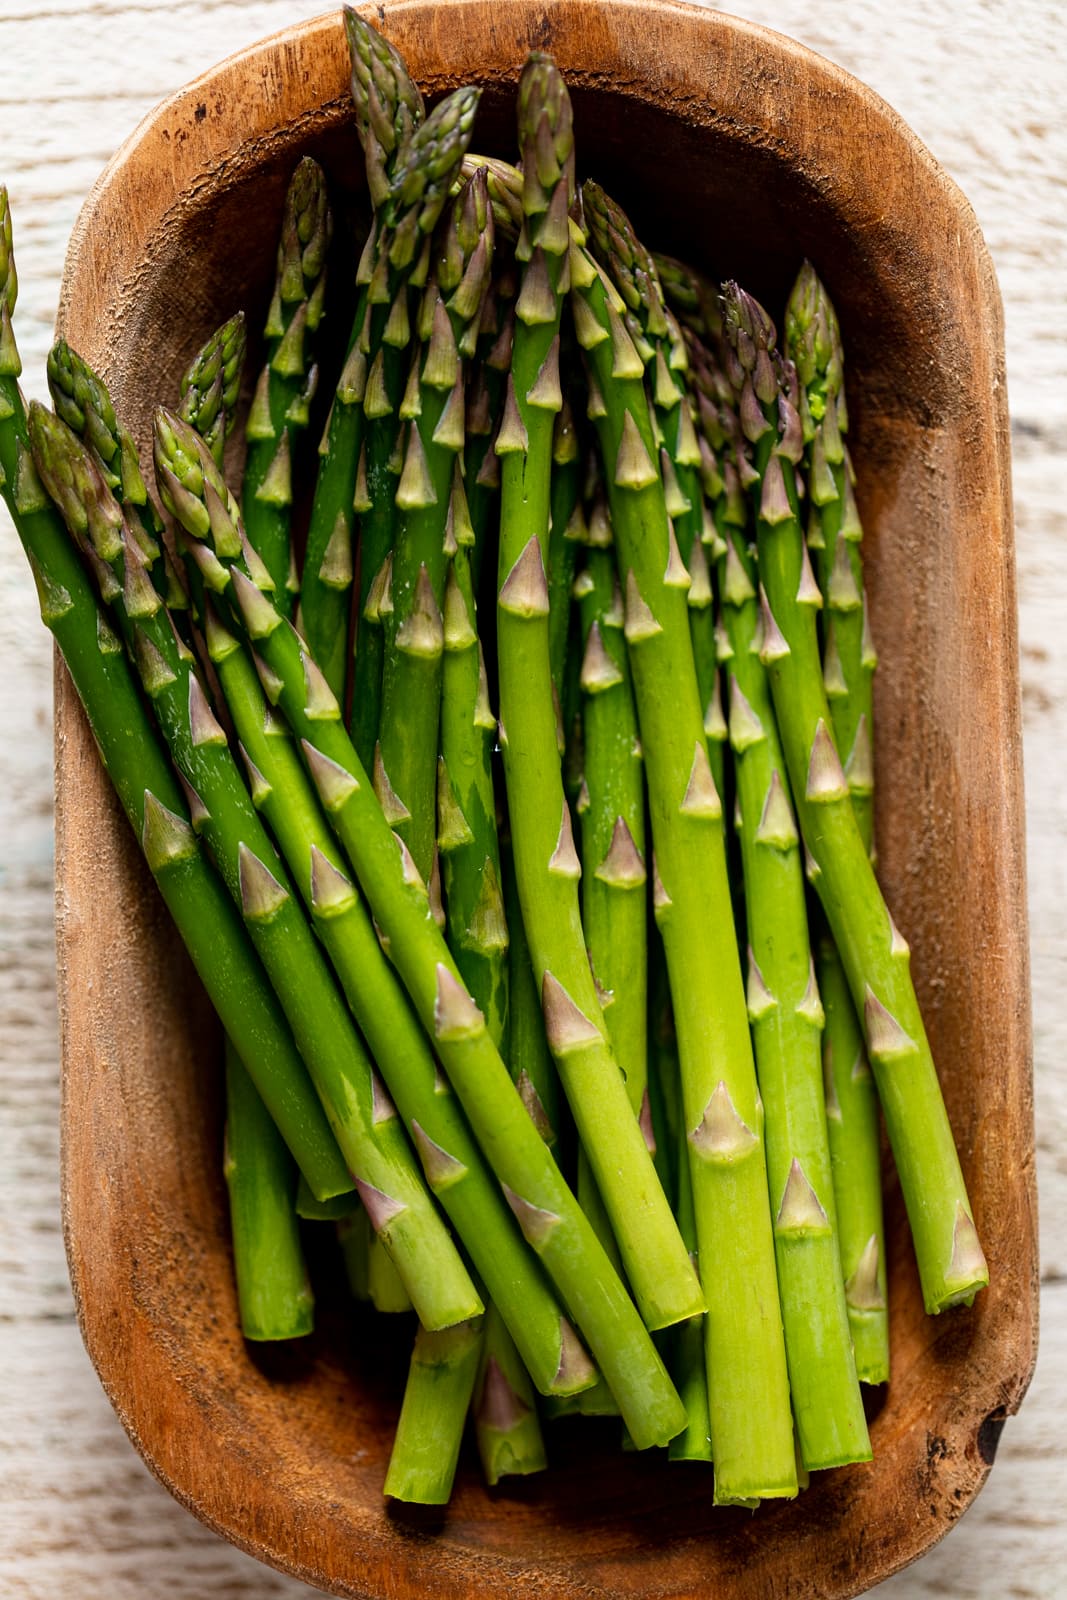 Wooden bowl of asparagus